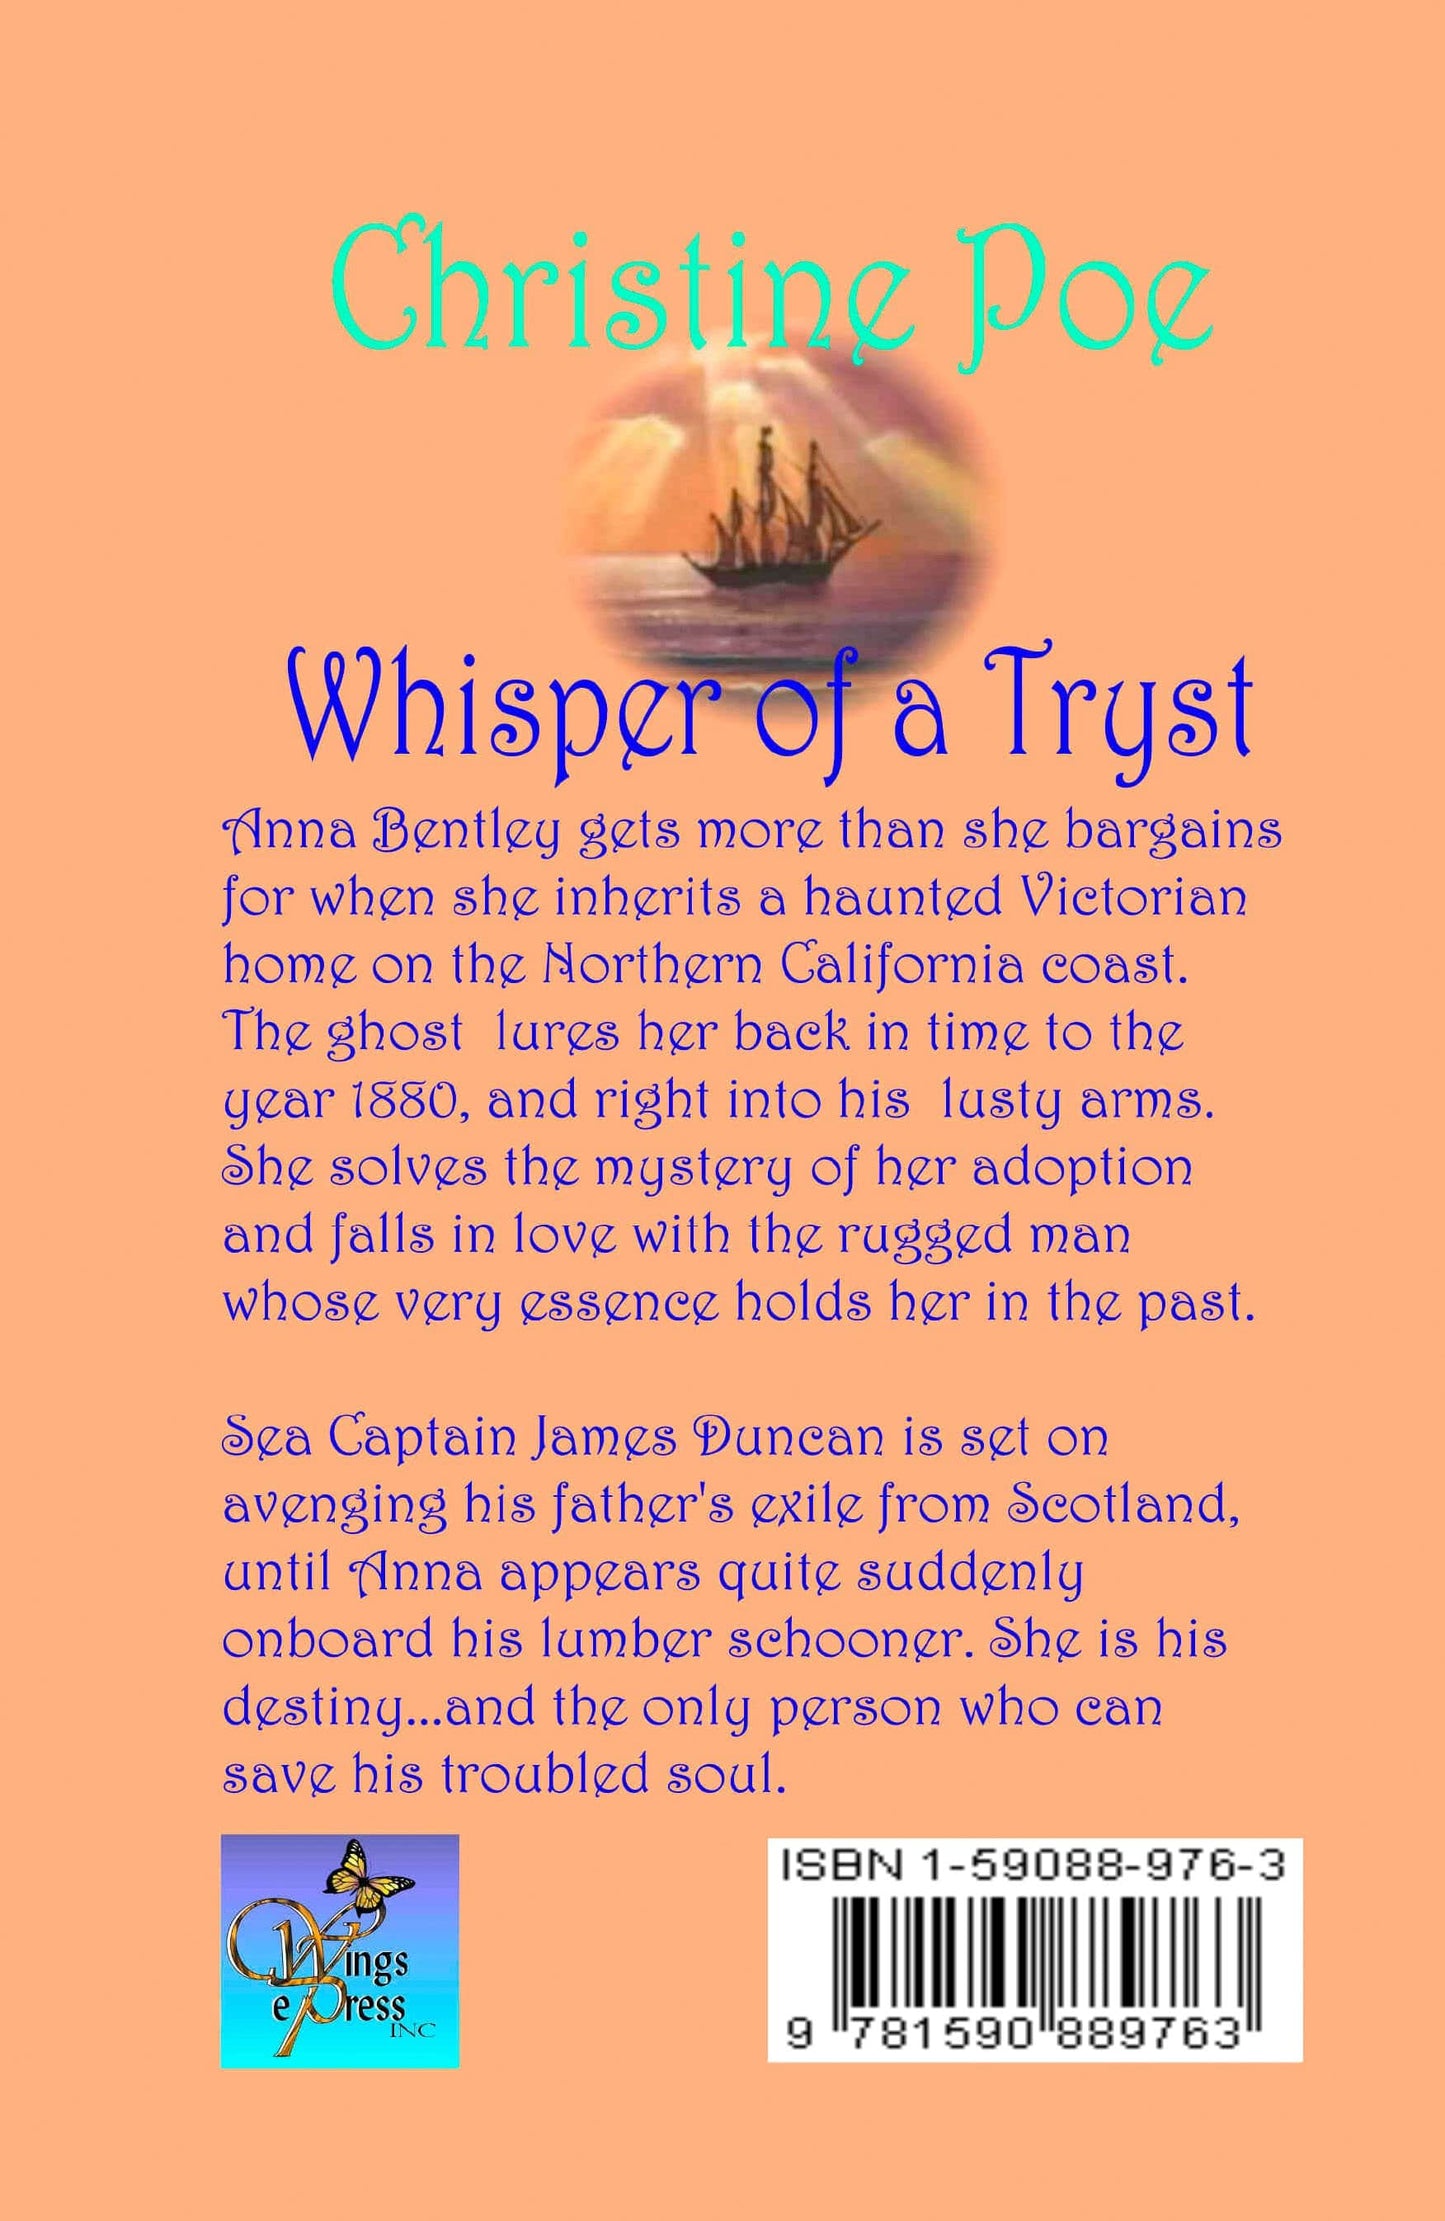 Whisper of a Tryst